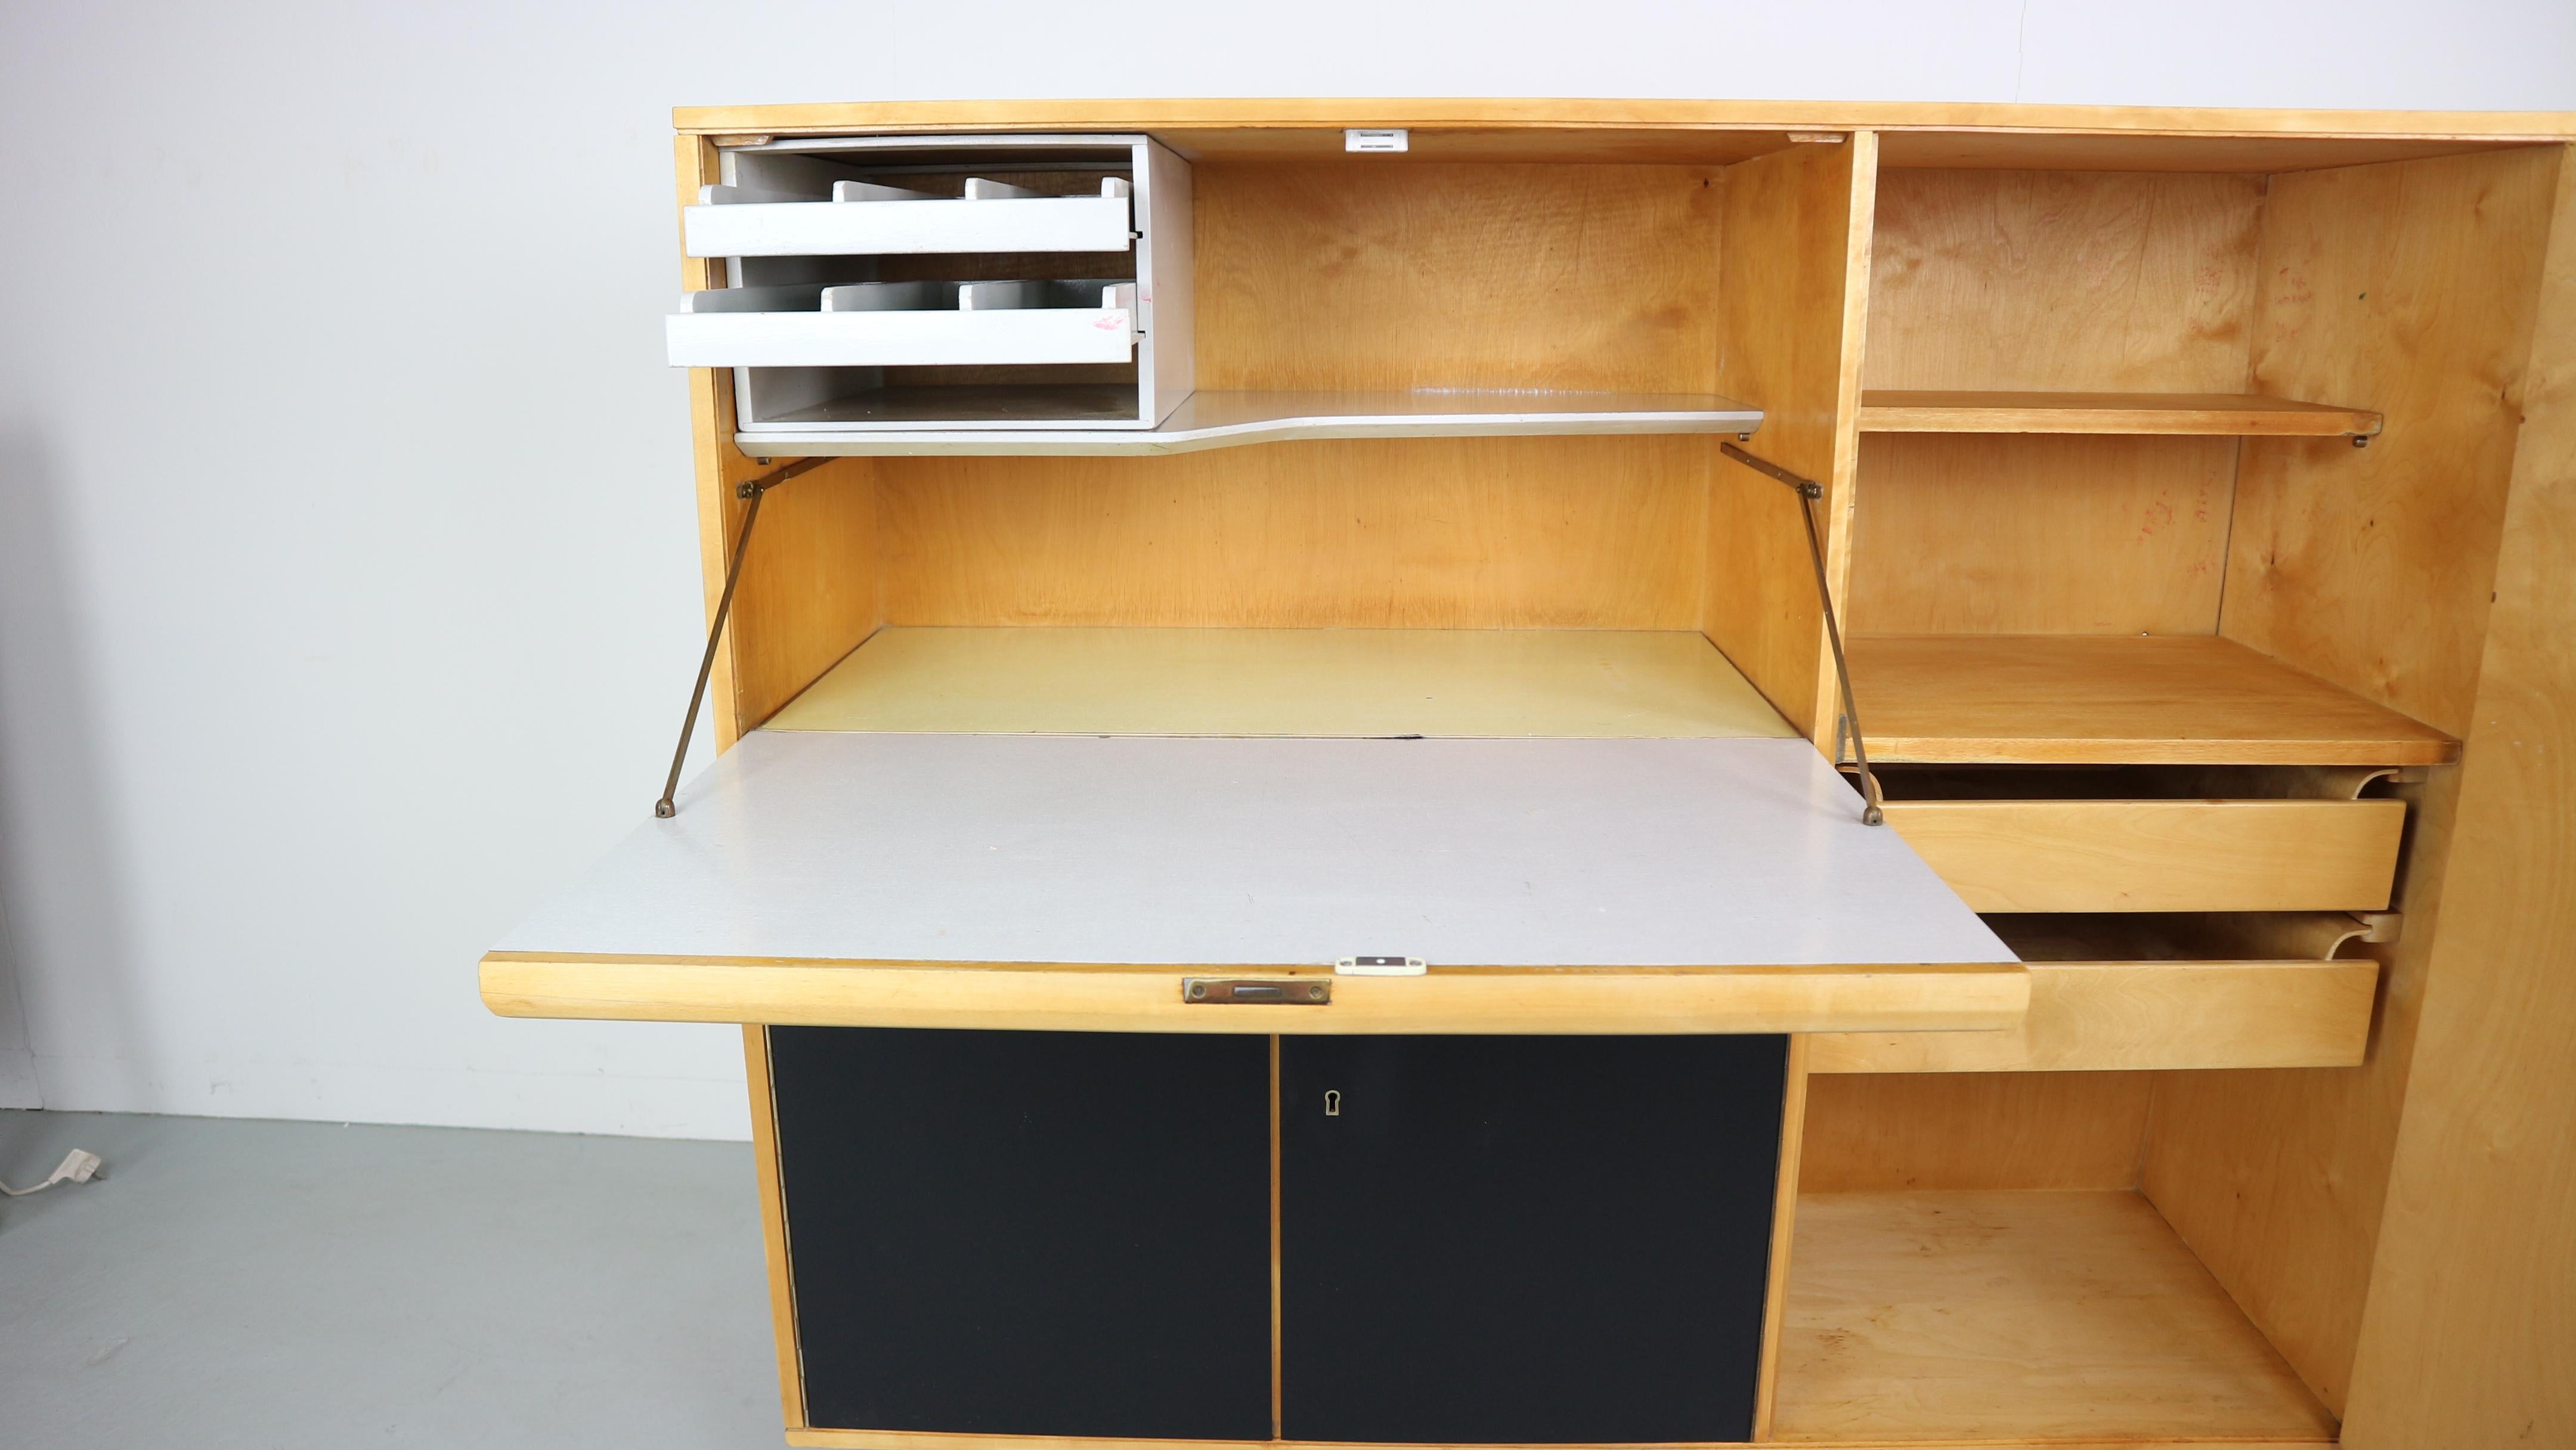 Cabinet CB01 with desk and storage place made of birch wood, designed by Cees Braakman for UMS Pastoe, circa 1950. Desk with grey shelve. At the right side door with shelve and two drawers inside, underneath the desk compartment with shelve inside.